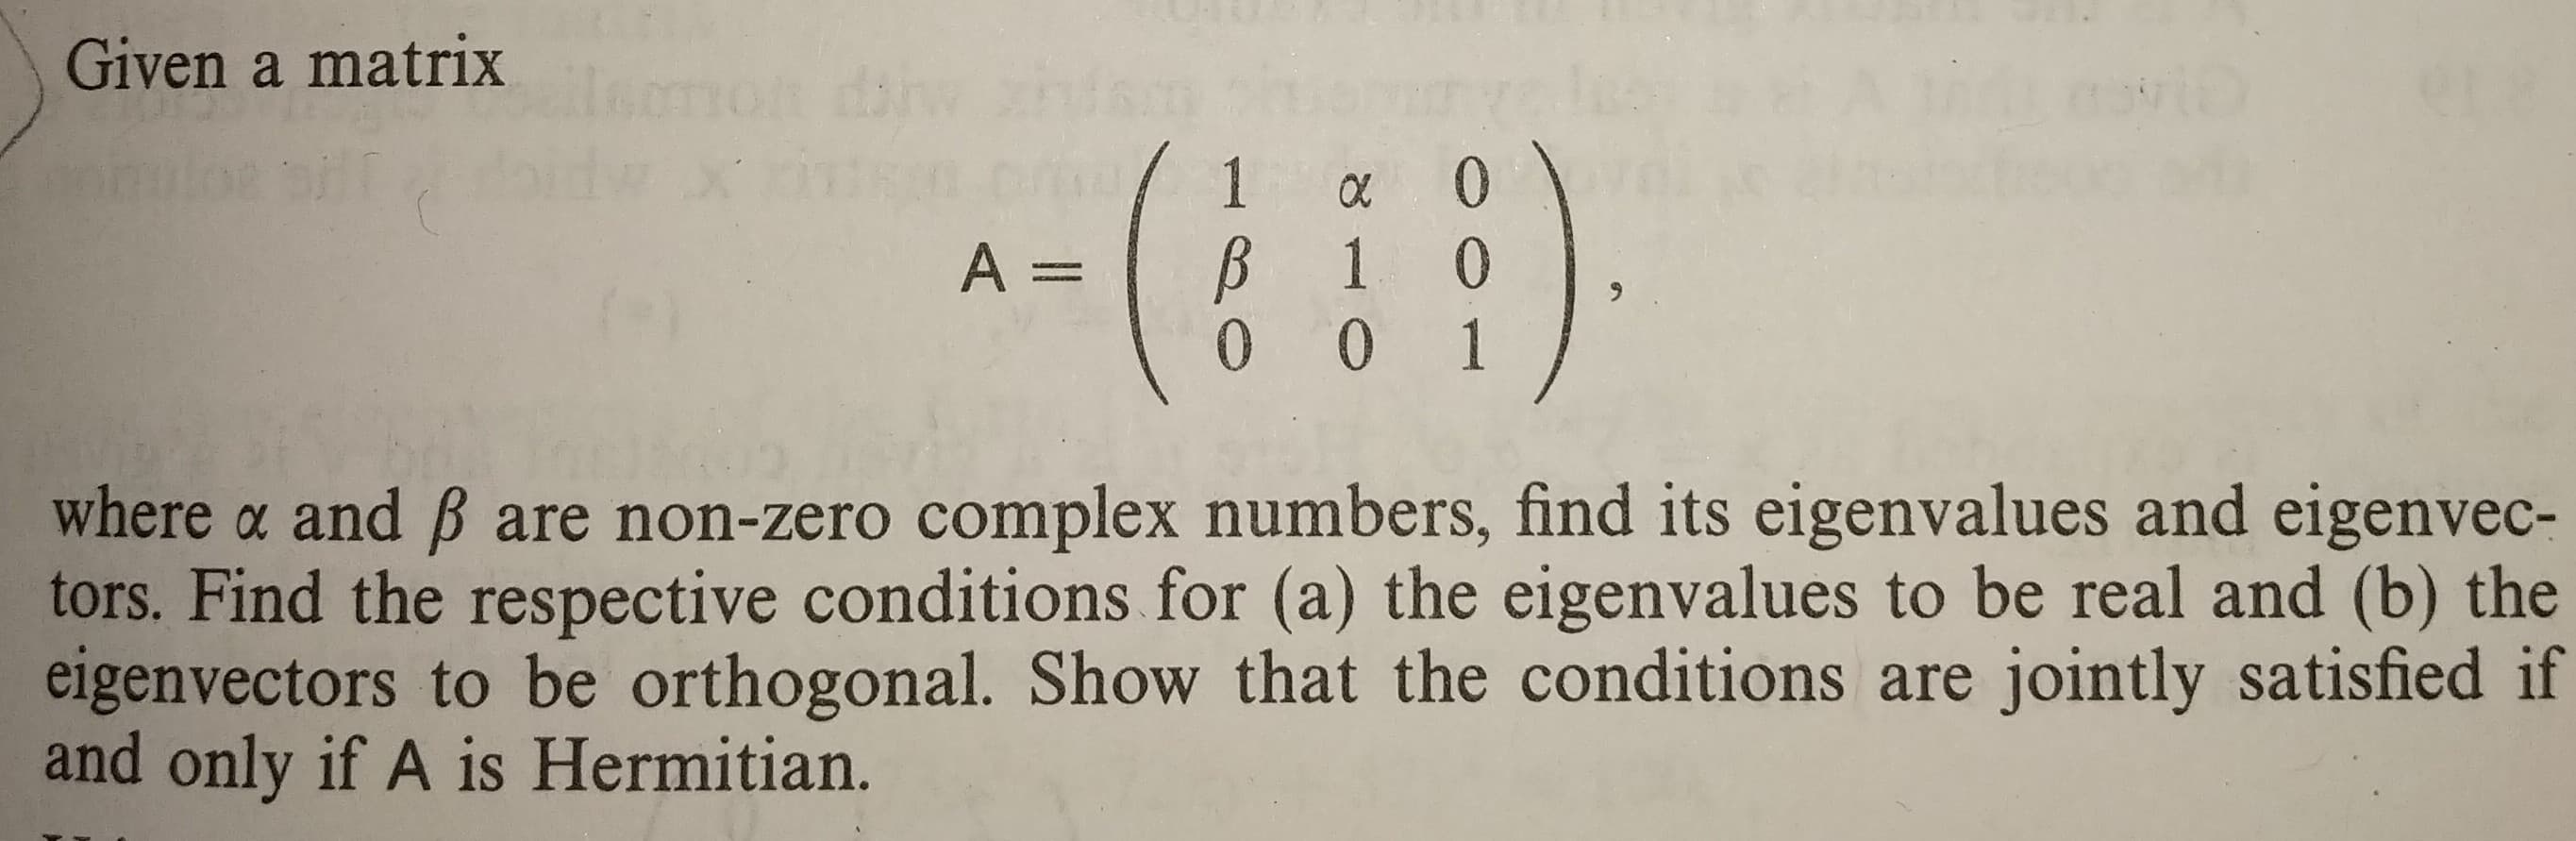 Given a matrix
where α and β are non-zero complex numbers, find its eigenvalues and eigenvec-
tors. Find the respective conditions for (a) the eigenvalues to be real and (b) the
eigenvectors to be orthogonal. Show that the conditions are jointly satisfied if
and only if A is Hermitian.
